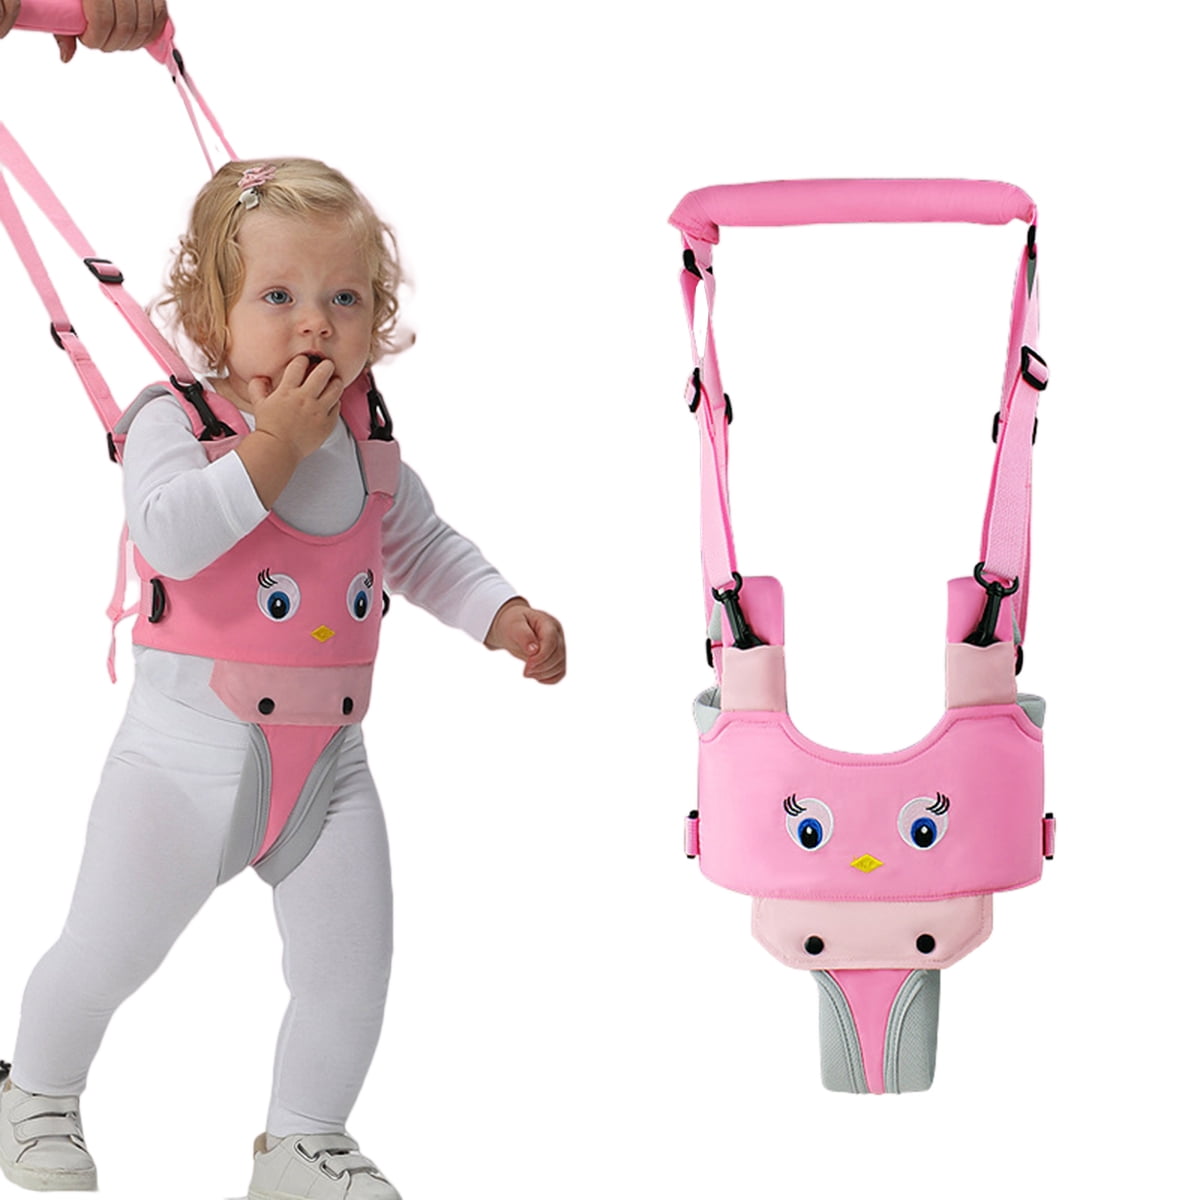 baby walker harness assistant toddler leash for kid learning walking safety np&a 